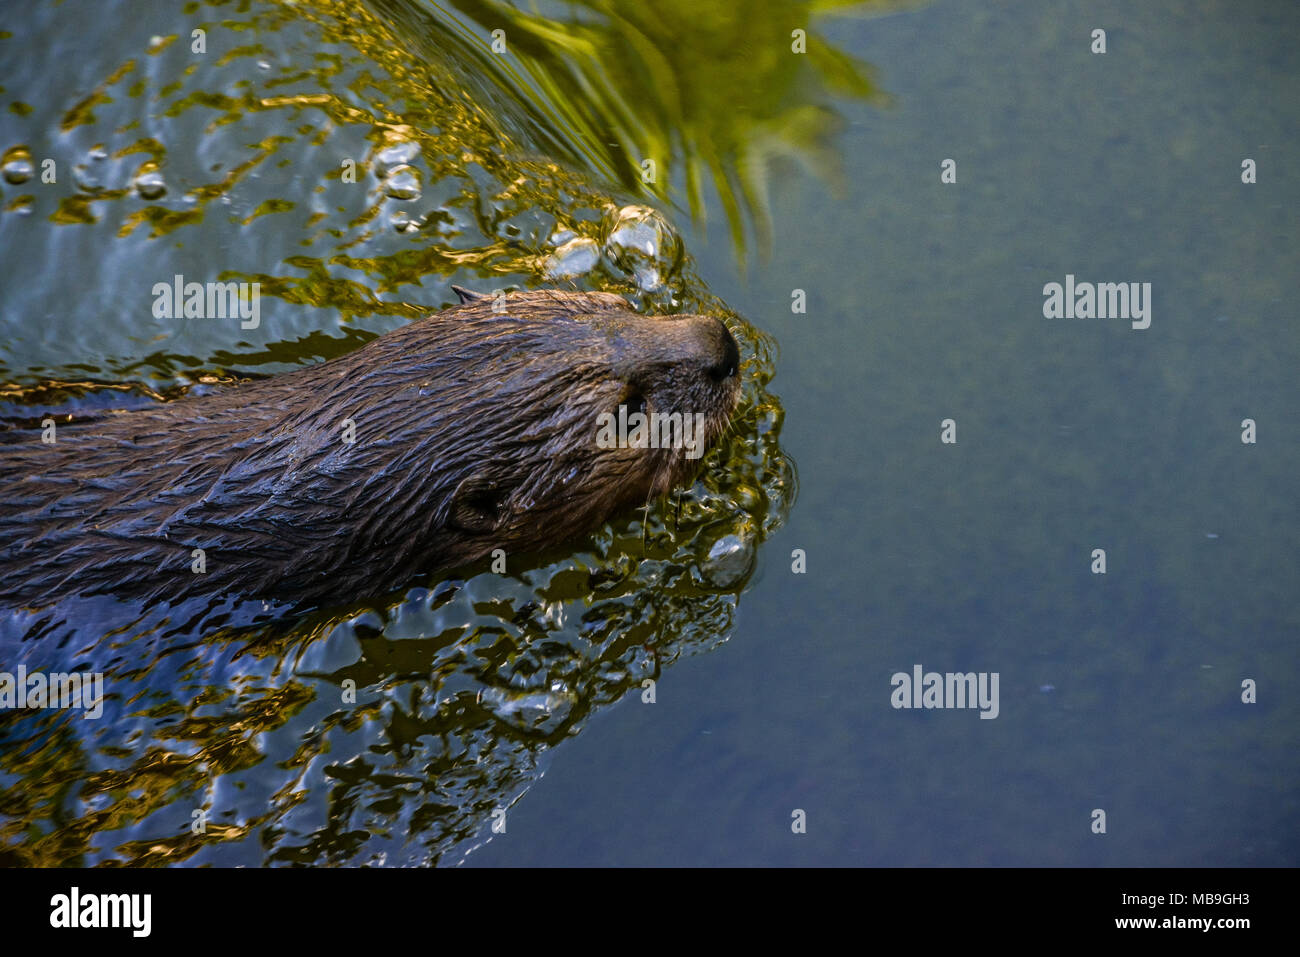 A spotted-necked otter (Hydrictis maculicollis) in Cango Wildlife Ranch, South Africa Stock Photo